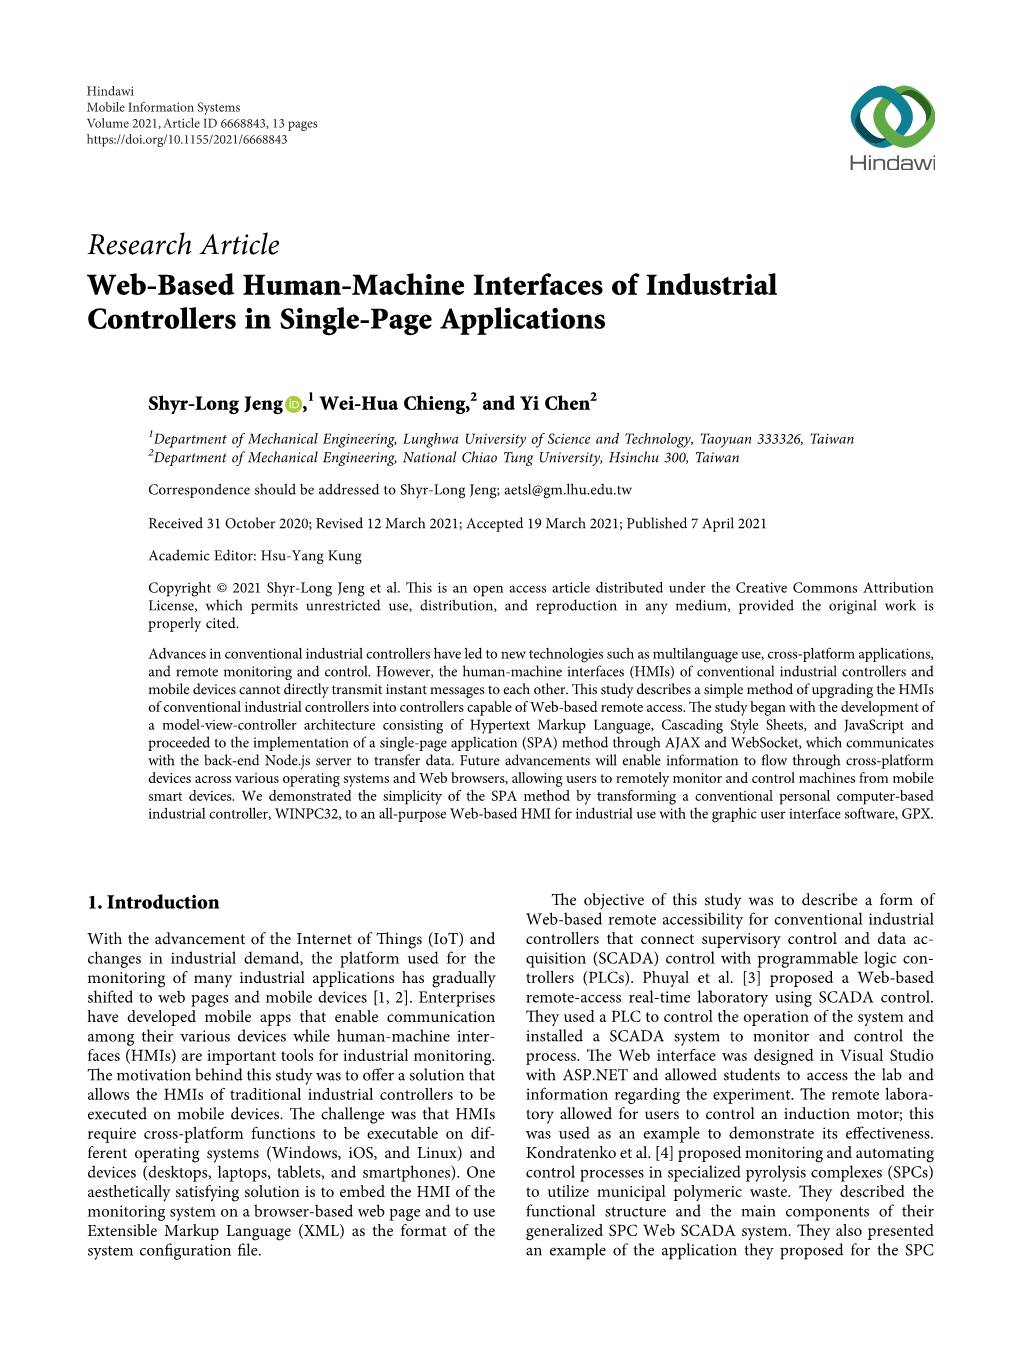 Web-Based Human-Machine Interfaces of Industrial Controllers in Single-Page Applications